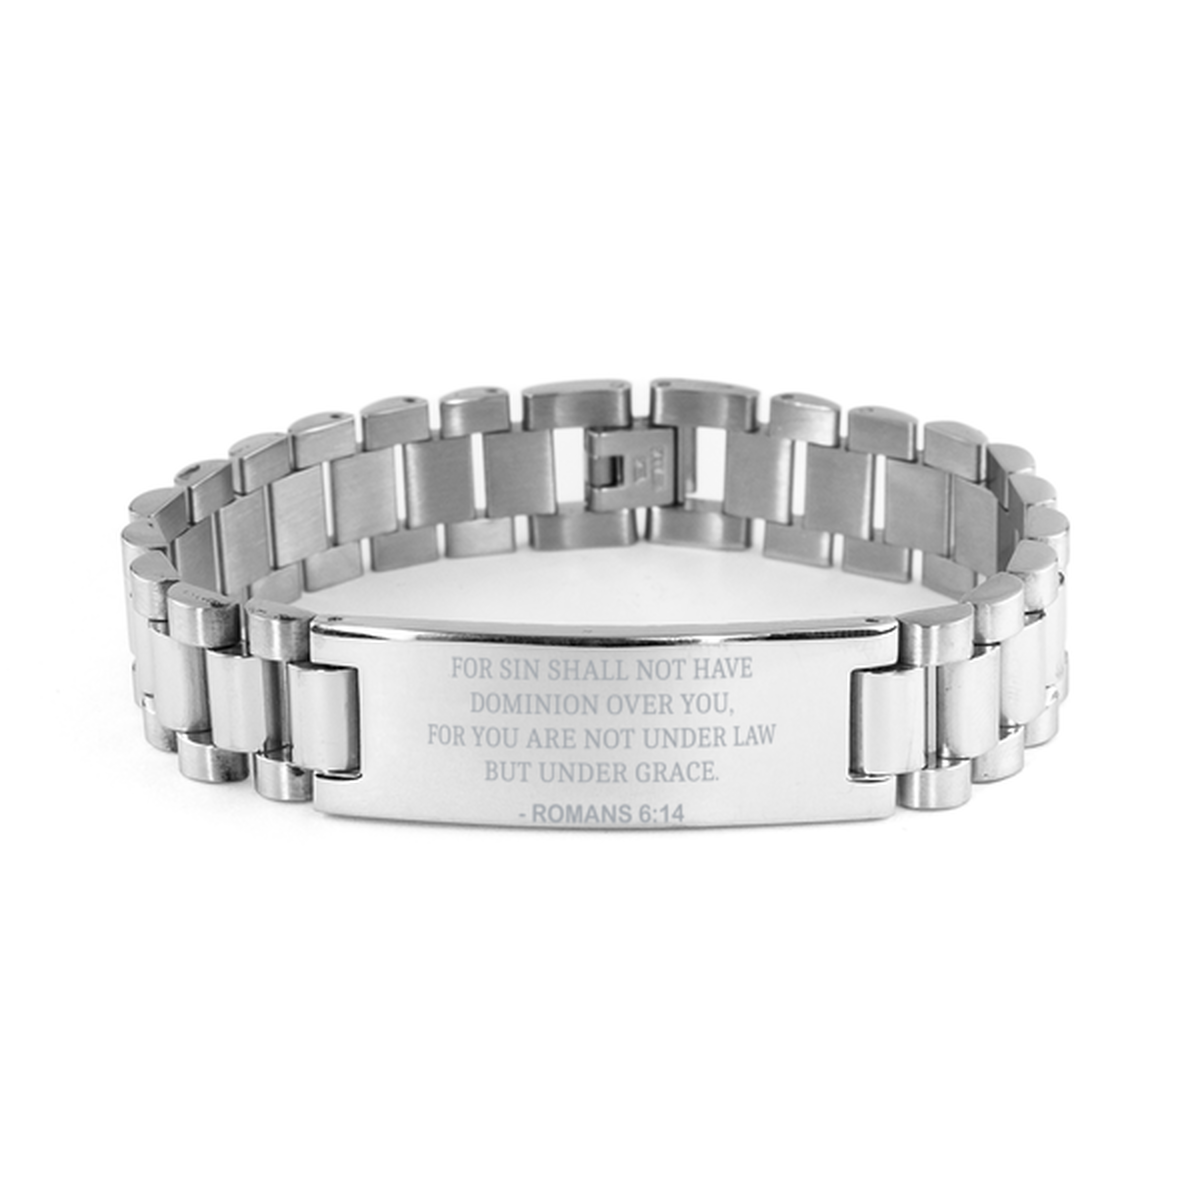 Christian Ladder Stainless Steel Bracelet, Romans 6:14 For Sin Shall Not Have Dominion Over You, For You, Motivational Bible Verse Gifts For Men Women